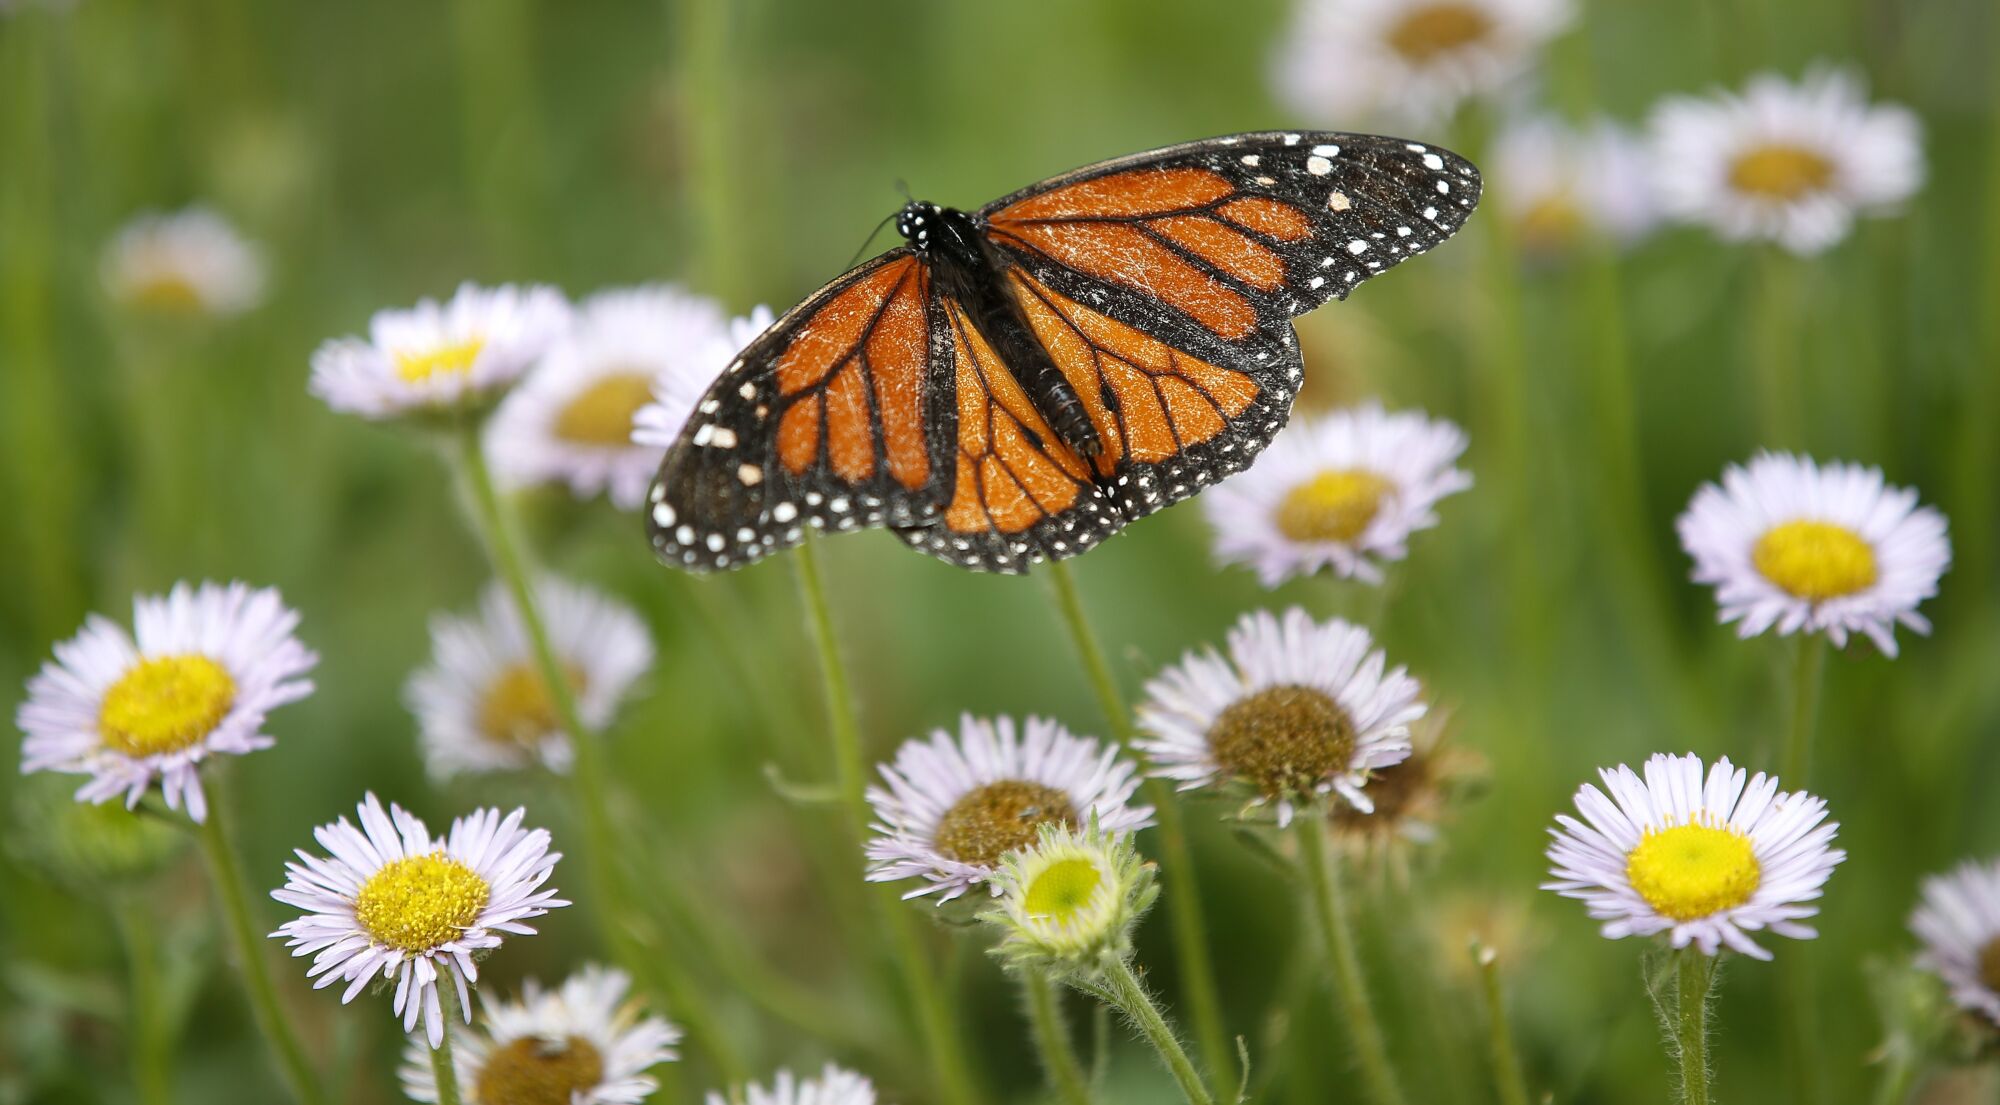 A monarch butterfly lands on a flower at Butterfly Farms in Encinitas